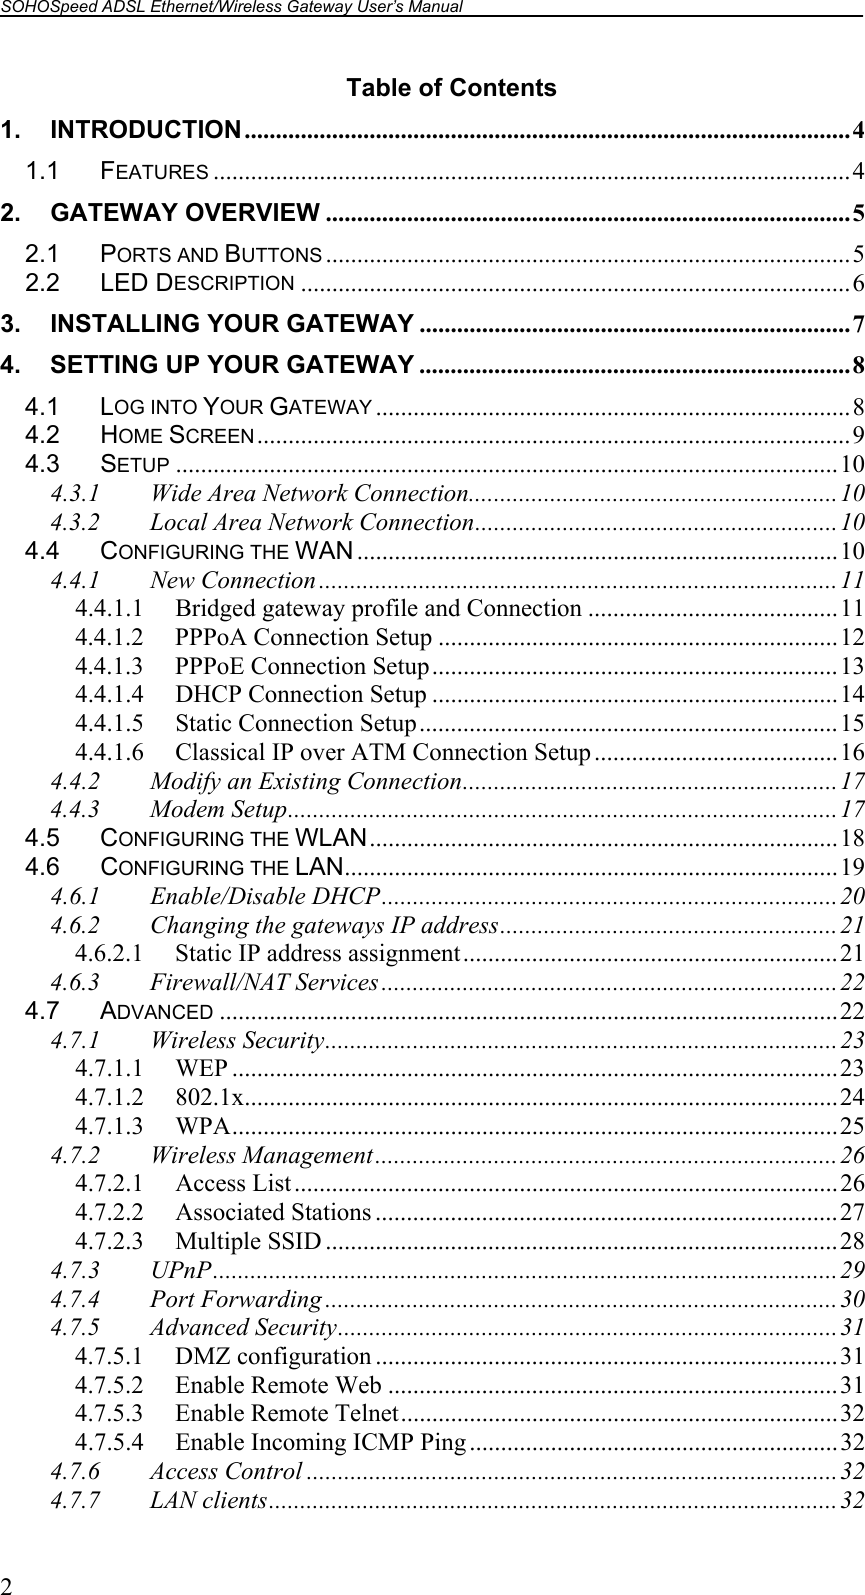 SOHOSpeed ADSL Ethernet/Wireless Gateway User’s Manual    2 Table of Contents 1. INTRODUCTION.................................................................................................4 1.1 FEATURES ......................................................................................................4 2. GATEWAY OVERVIEW ....................................................................................5 2.1 PORTS AND BUTTONS ....................................................................................5 2.2 LED DESCRIPTION ........................................................................................6 3. INSTALLING YOUR GATEWAY .....................................................................7 4. SETTING UP YOUR GATEWAY .....................................................................8 4.1 LOG INTO YOUR GATEWAY ............................................................................8 4.2 HOME SCREEN...............................................................................................9 4.3 SETUP ..........................................................................................................10 4.3.1 Wide Area Network Connection...........................................................10 4.3.2 Local Area Network Connection..........................................................10 4.4 CONFIGURING THE WAN .............................................................................10 4.4.1 New Connection ...................................................................................11 4.4.1.1  Bridged gateway profile and Connection ........................................11 4.4.1.2  PPPoA Connection Setup ................................................................12 4.4.1.3  PPPoE Connection Setup.................................................................13 4.4.1.4 DHCP Connection Setup .................................................................14 4.4.1.5  Static Connection Setup...................................................................15 4.4.1.6  Classical IP over ATM Connection Setup .......................................16 4.4.2 Modify an Existing Connection............................................................17 4.4.3 Modem Setup........................................................................................17 4.5 CONFIGURING THE WLAN...........................................................................18 4.6 CONFIGURING THE LAN...............................................................................19 4.6.1 Enable/Disable DHCP.........................................................................20 4.6.2 Changing the gateways IP address......................................................21 4.6.2.1  Static IP address assignment............................................................21 4.6.3 Firewall/NAT Services .........................................................................22 4.7 ADVANCED ...................................................................................................22 4.7.1 Wireless Security..................................................................................23 4.7.1.1 WEP .................................................................................................23 4.7.1.2 802.1x...............................................................................................24 4.7.1.3 WPA.................................................................................................25 4.7.2 Wireless Management..........................................................................26 4.7.2.1 Access List.......................................................................................26 4.7.2.2 Associated Stations ..........................................................................27 4.7.2.3 Multiple SSID ..................................................................................28 4.7.3 UPnP....................................................................................................29 4.7.4 Port Forwarding ..................................................................................30 4.7.5 Advanced Security................................................................................31 4.7.5.1 DMZ configuration ..........................................................................31 4.7.5.2  Enable Remote Web ........................................................................31 4.7.5.3  Enable Remote Telnet......................................................................32 4.7.5.4  Enable Incoming ICMP Ping...........................................................32 4.7.6 Access Control .....................................................................................32 4.7.7 LAN clients...........................................................................................32 